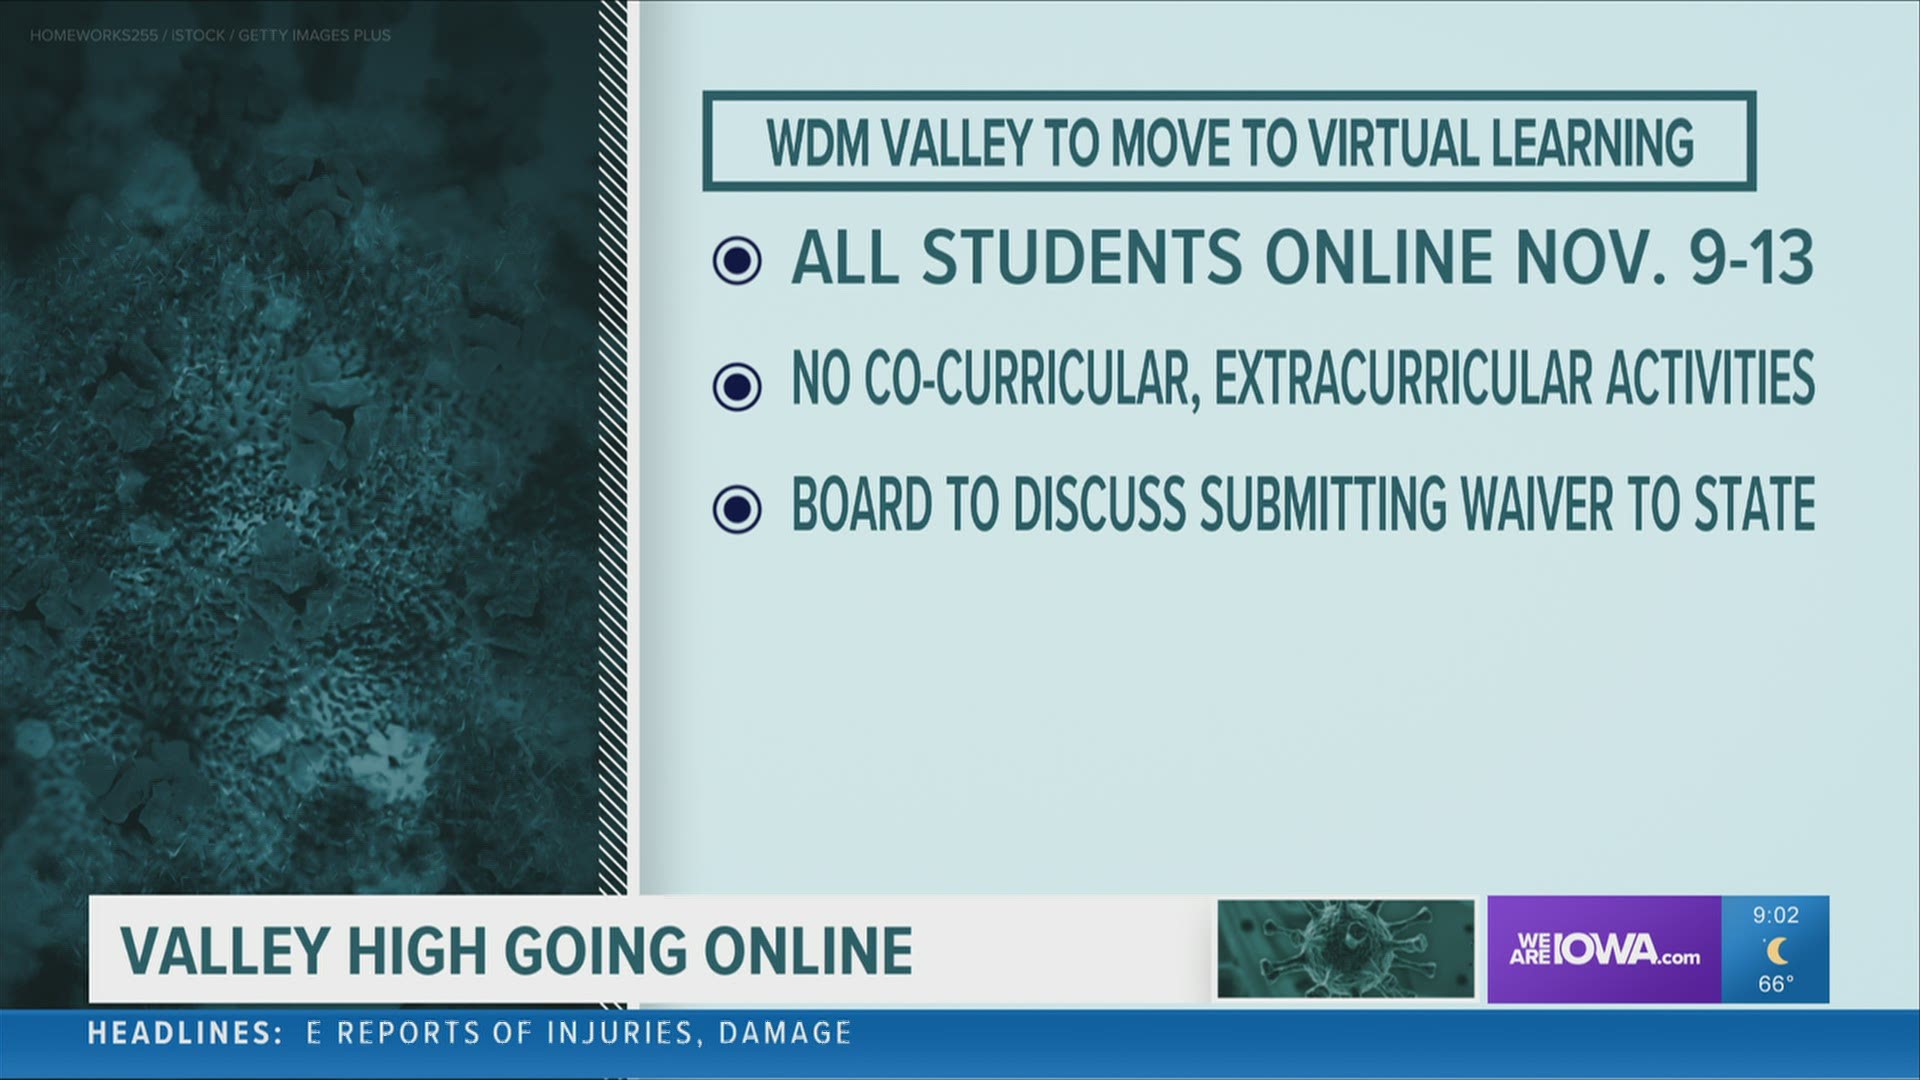 All learning will be done virtually for the week of Nov. 9-13, with the schoolboard discussing the possibility of submitting a waiver request to extend that time.